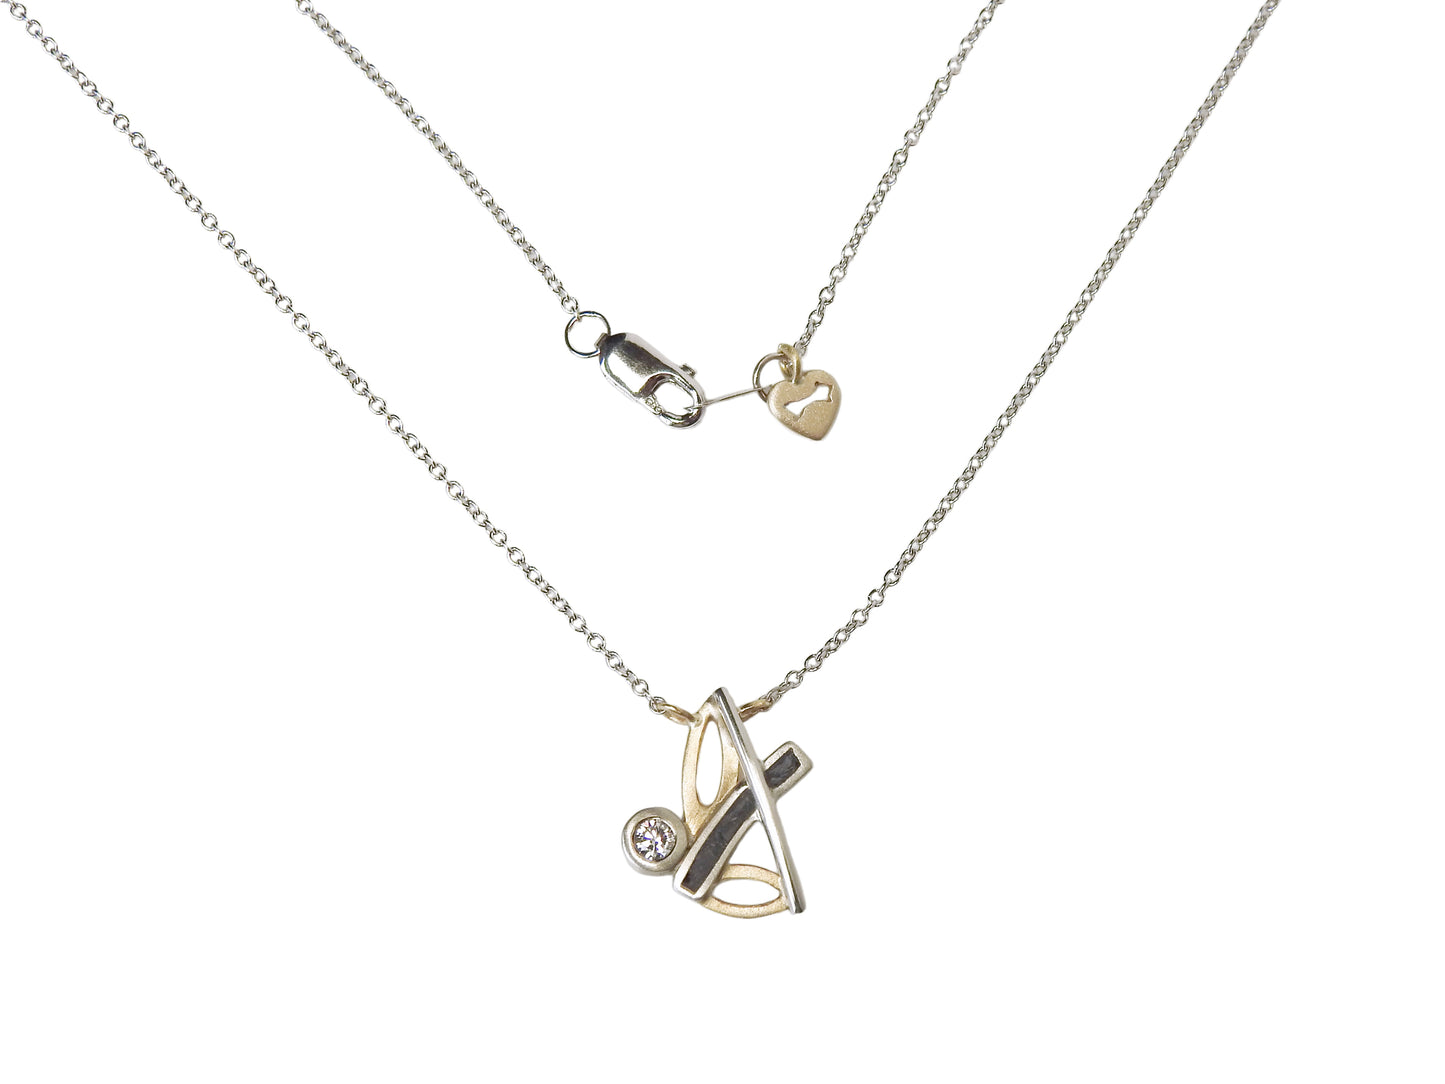 Bespoke 14kt white and yellow gold necklace with limestone inlay and .10 CT CANADAMARK - Hearts & Arrows diamond F+ VS, small 14kt yellow gold heart and arrow tag near clasp. 